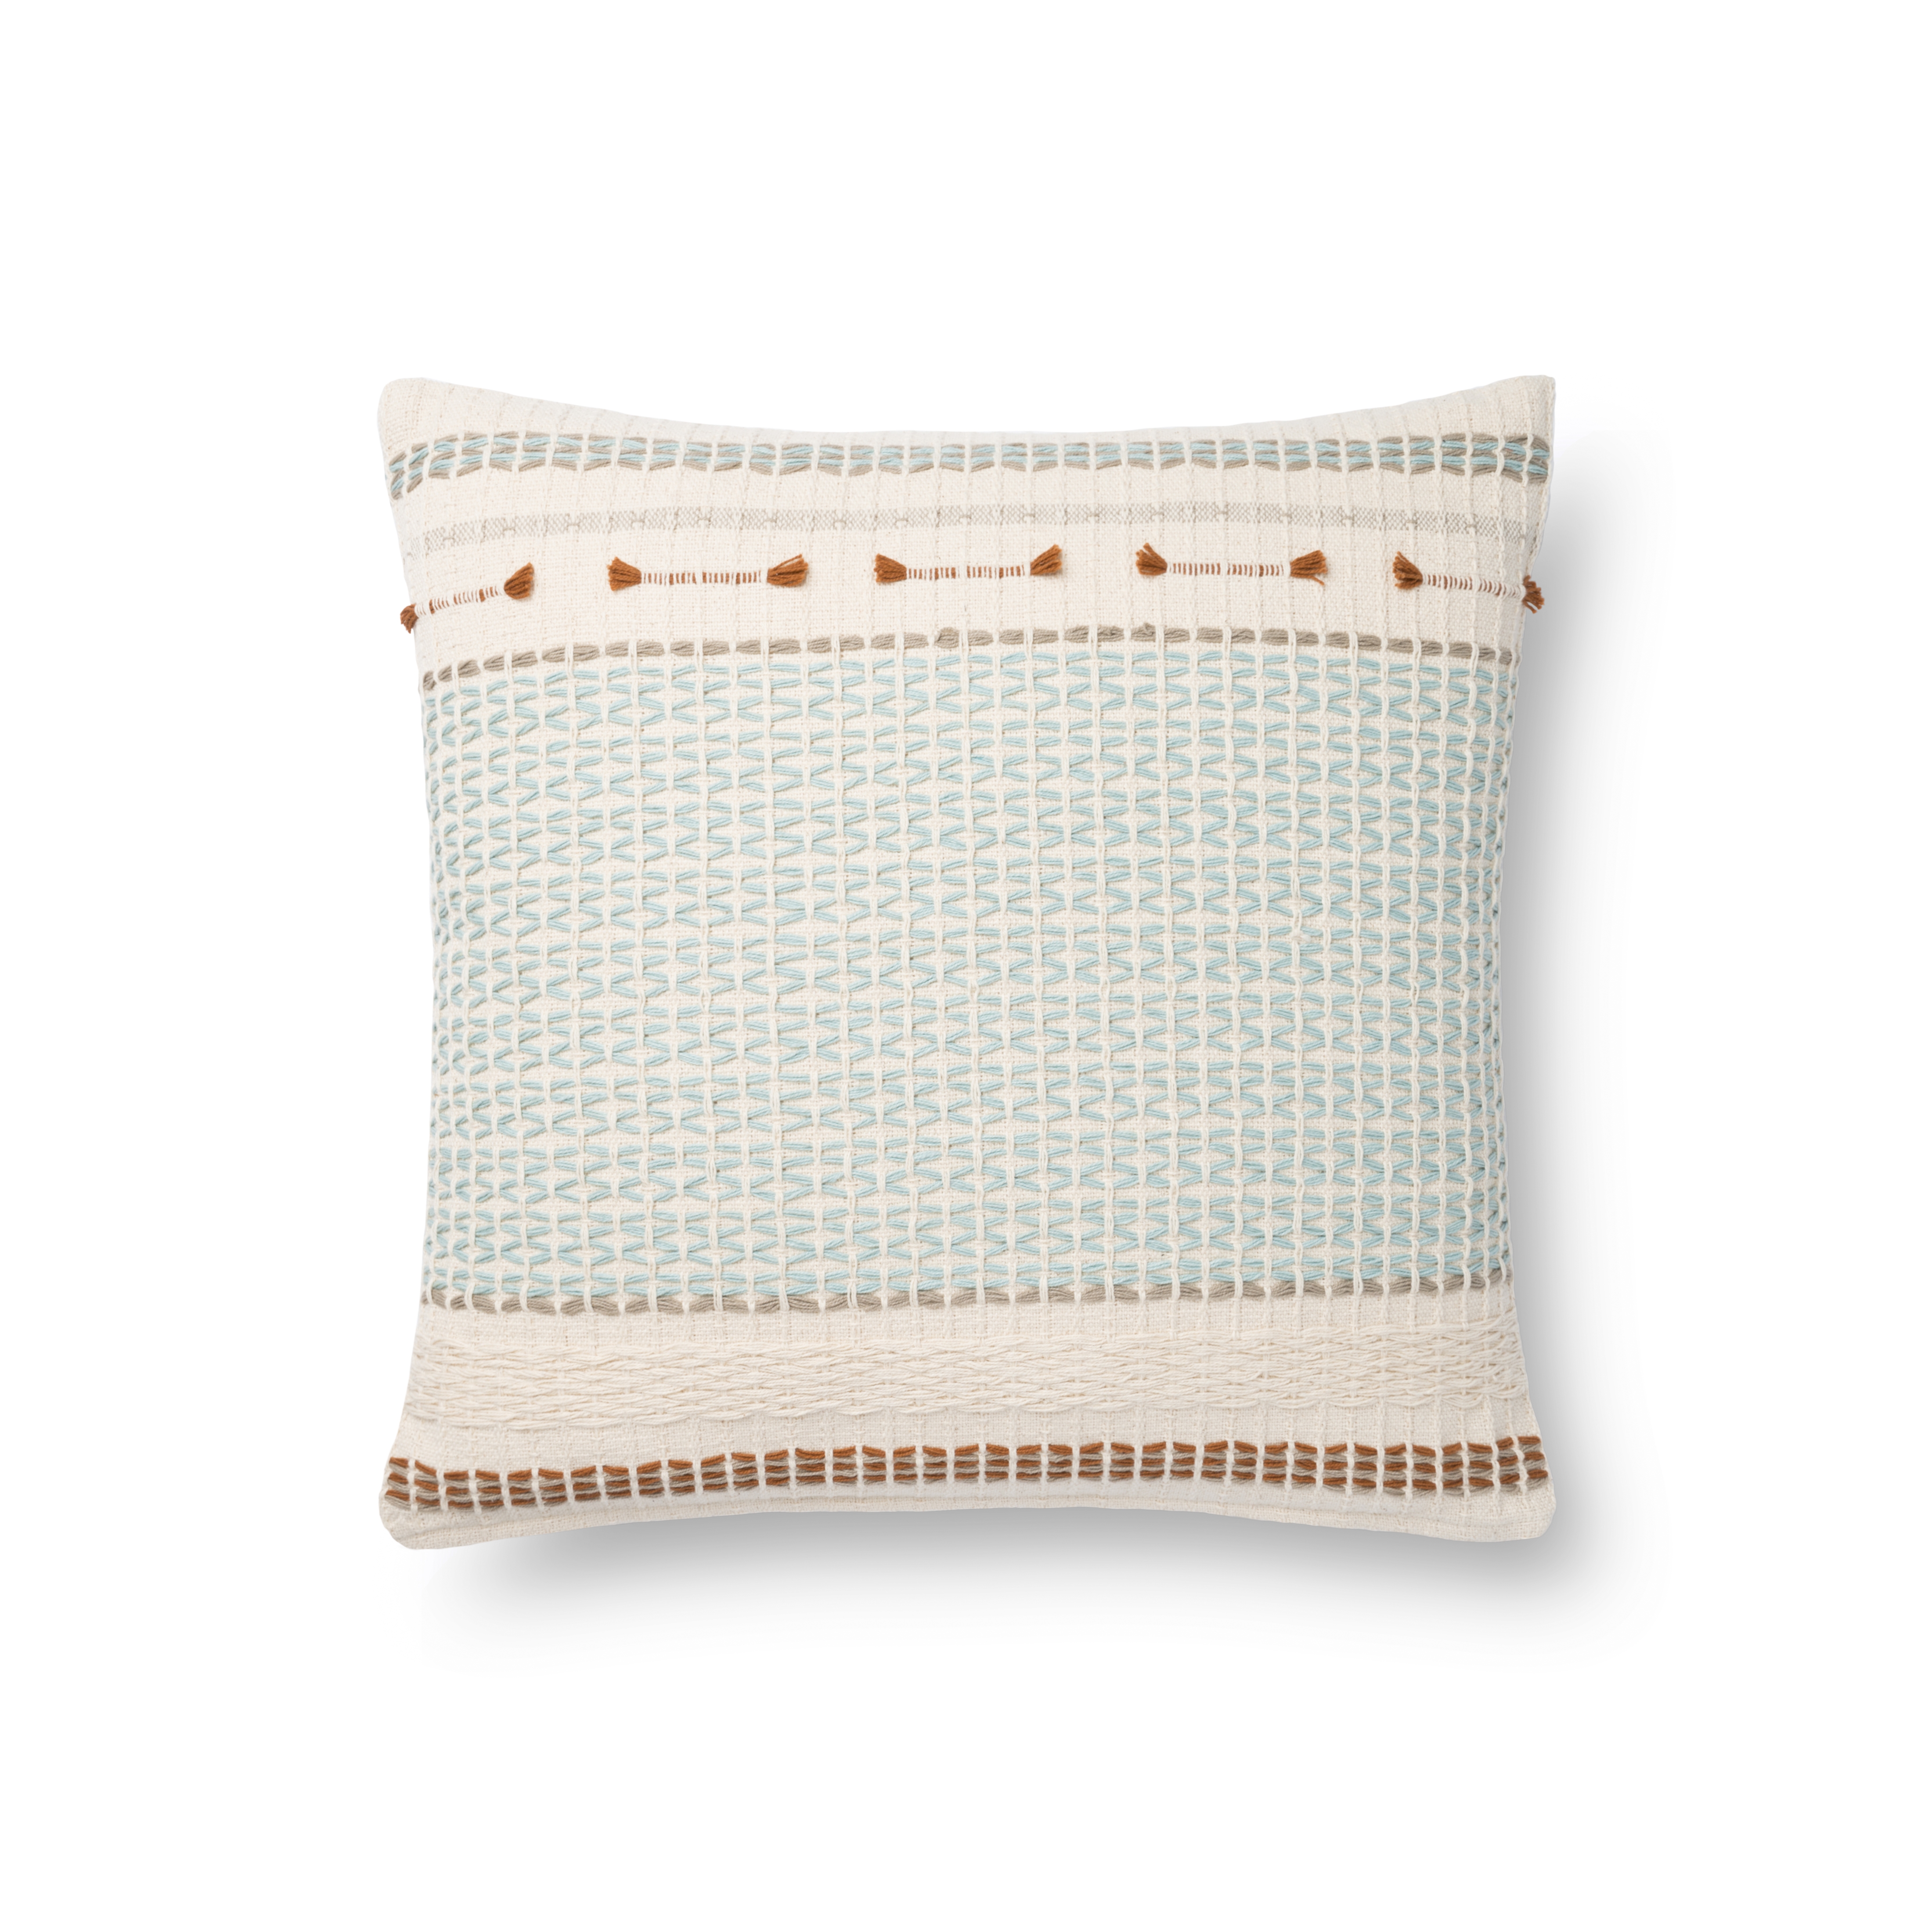 Magnolia Home by Joanna Gaines PILLOWS P1138 LIGHT BLUE / MULTI 18" x 18" Cover Only - Image 0